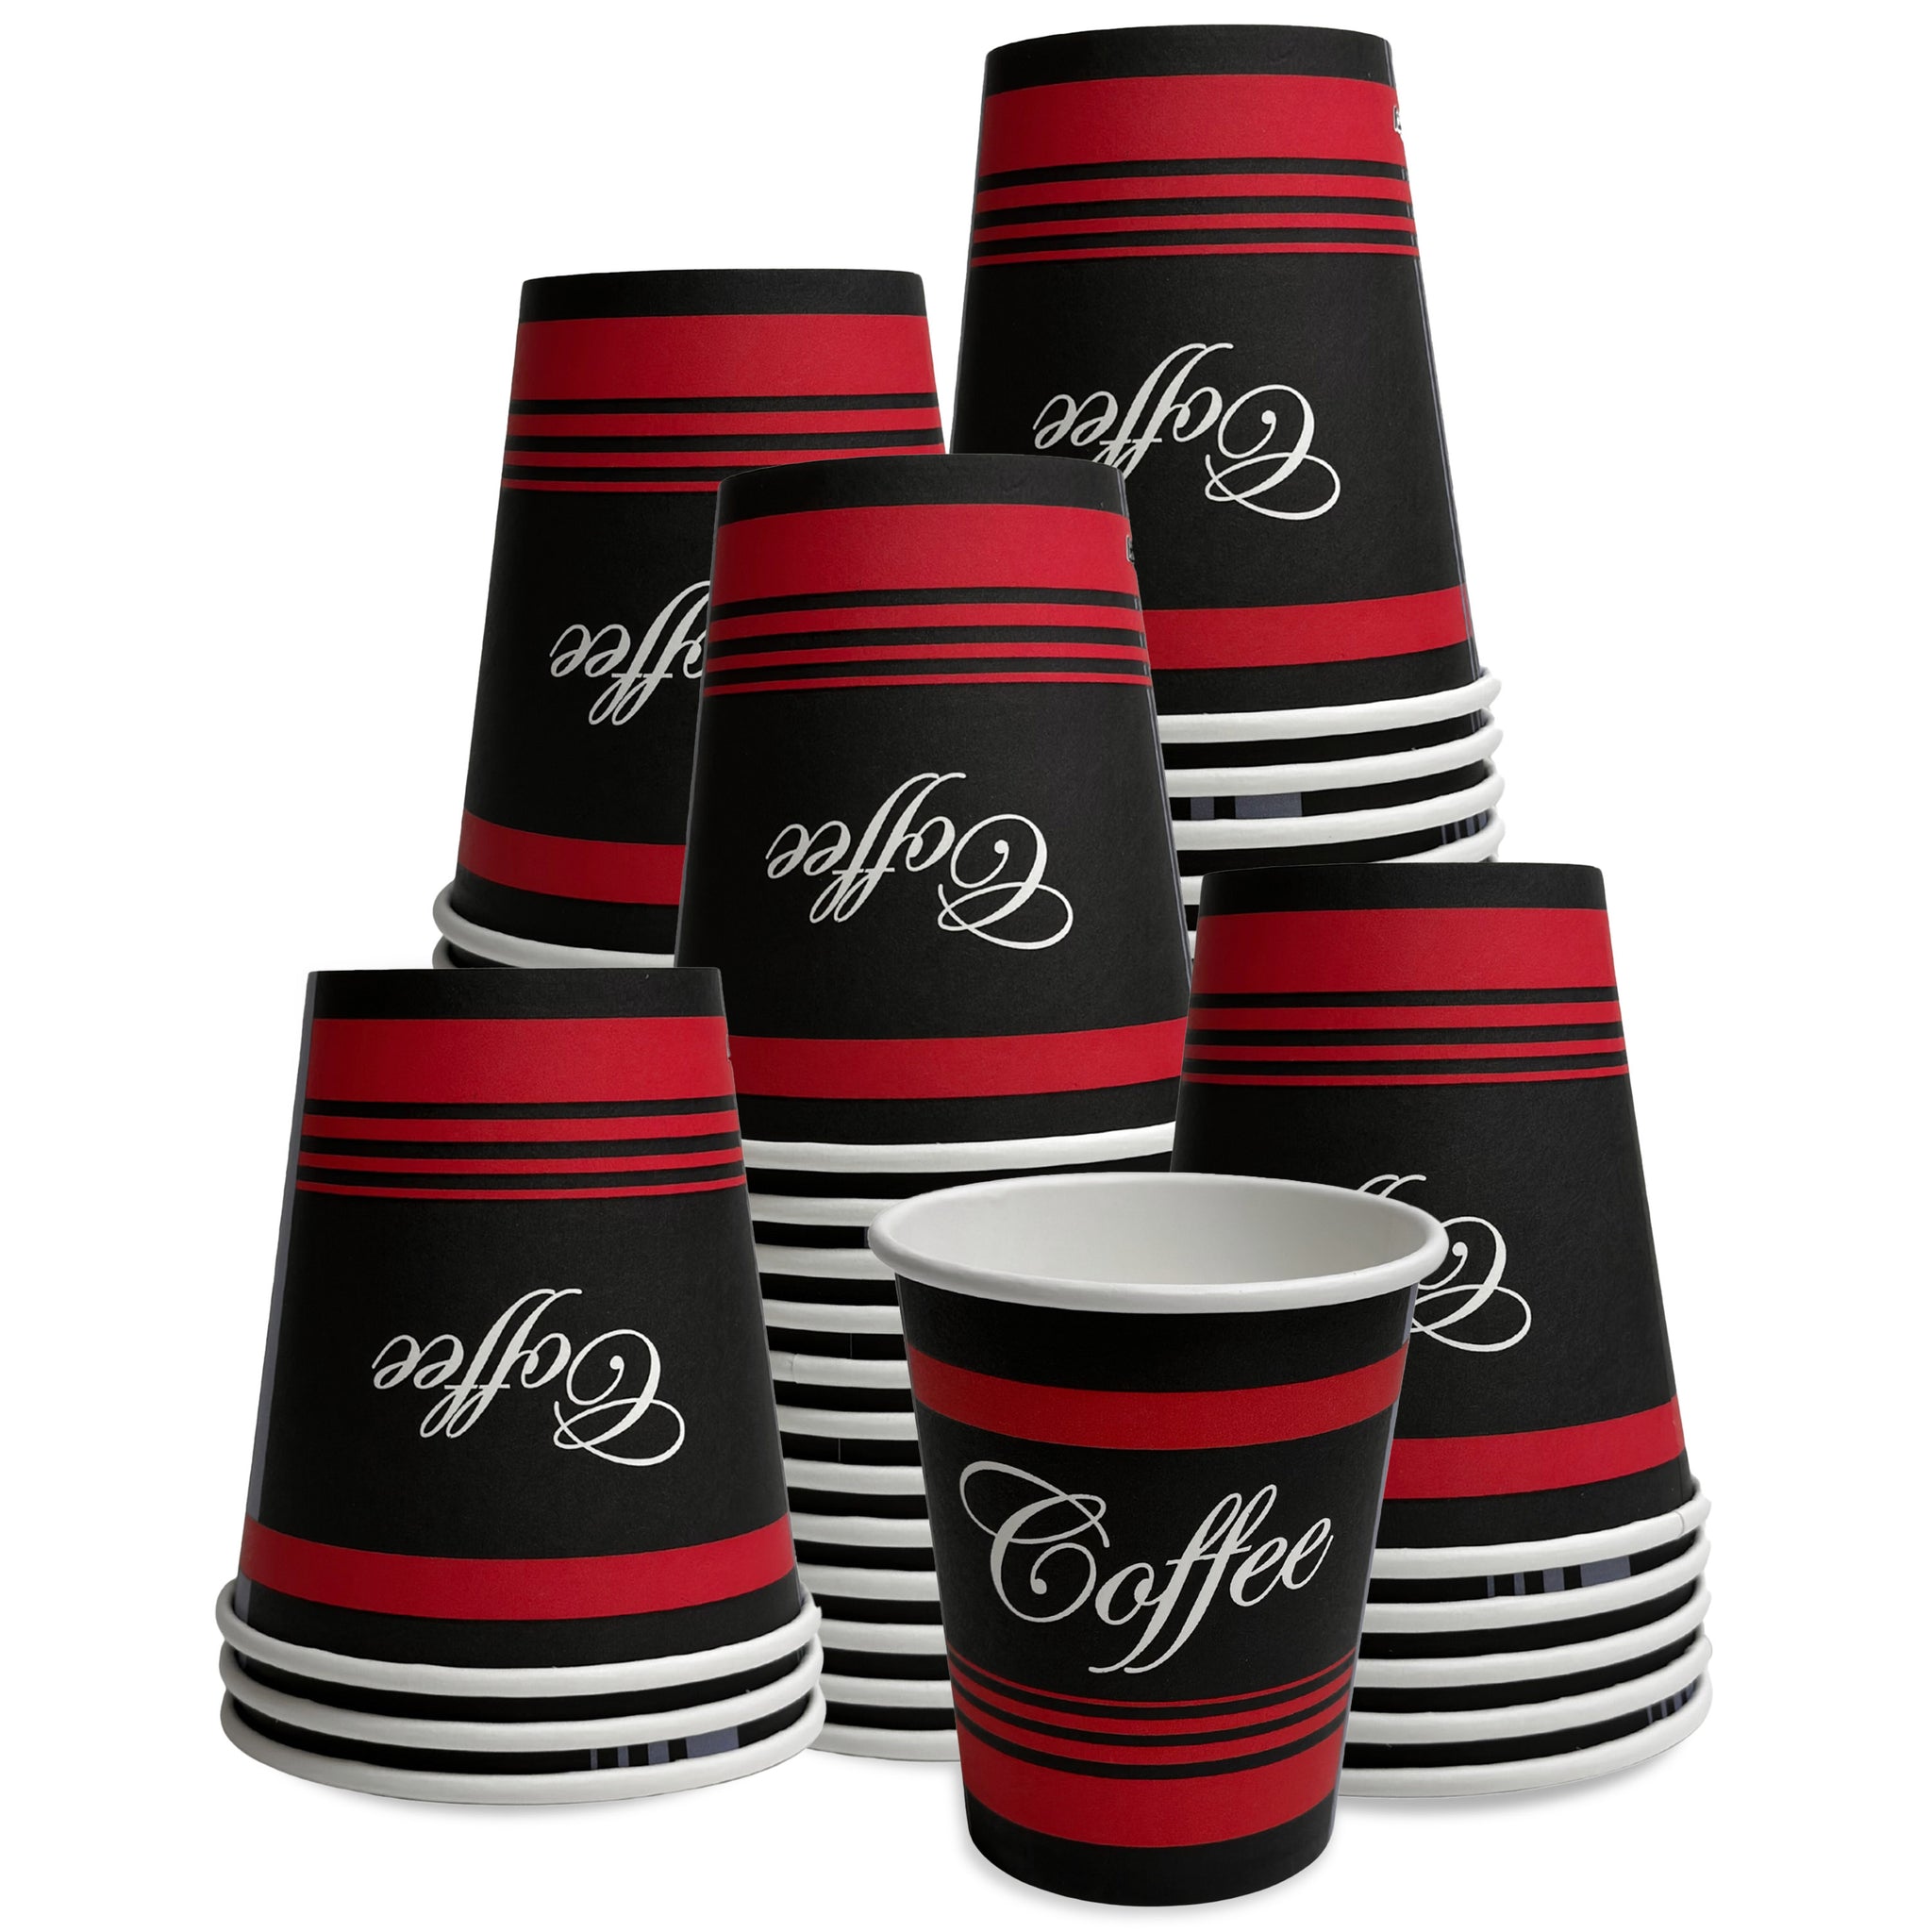 8oz Design Disposable Paper Coffee Cups